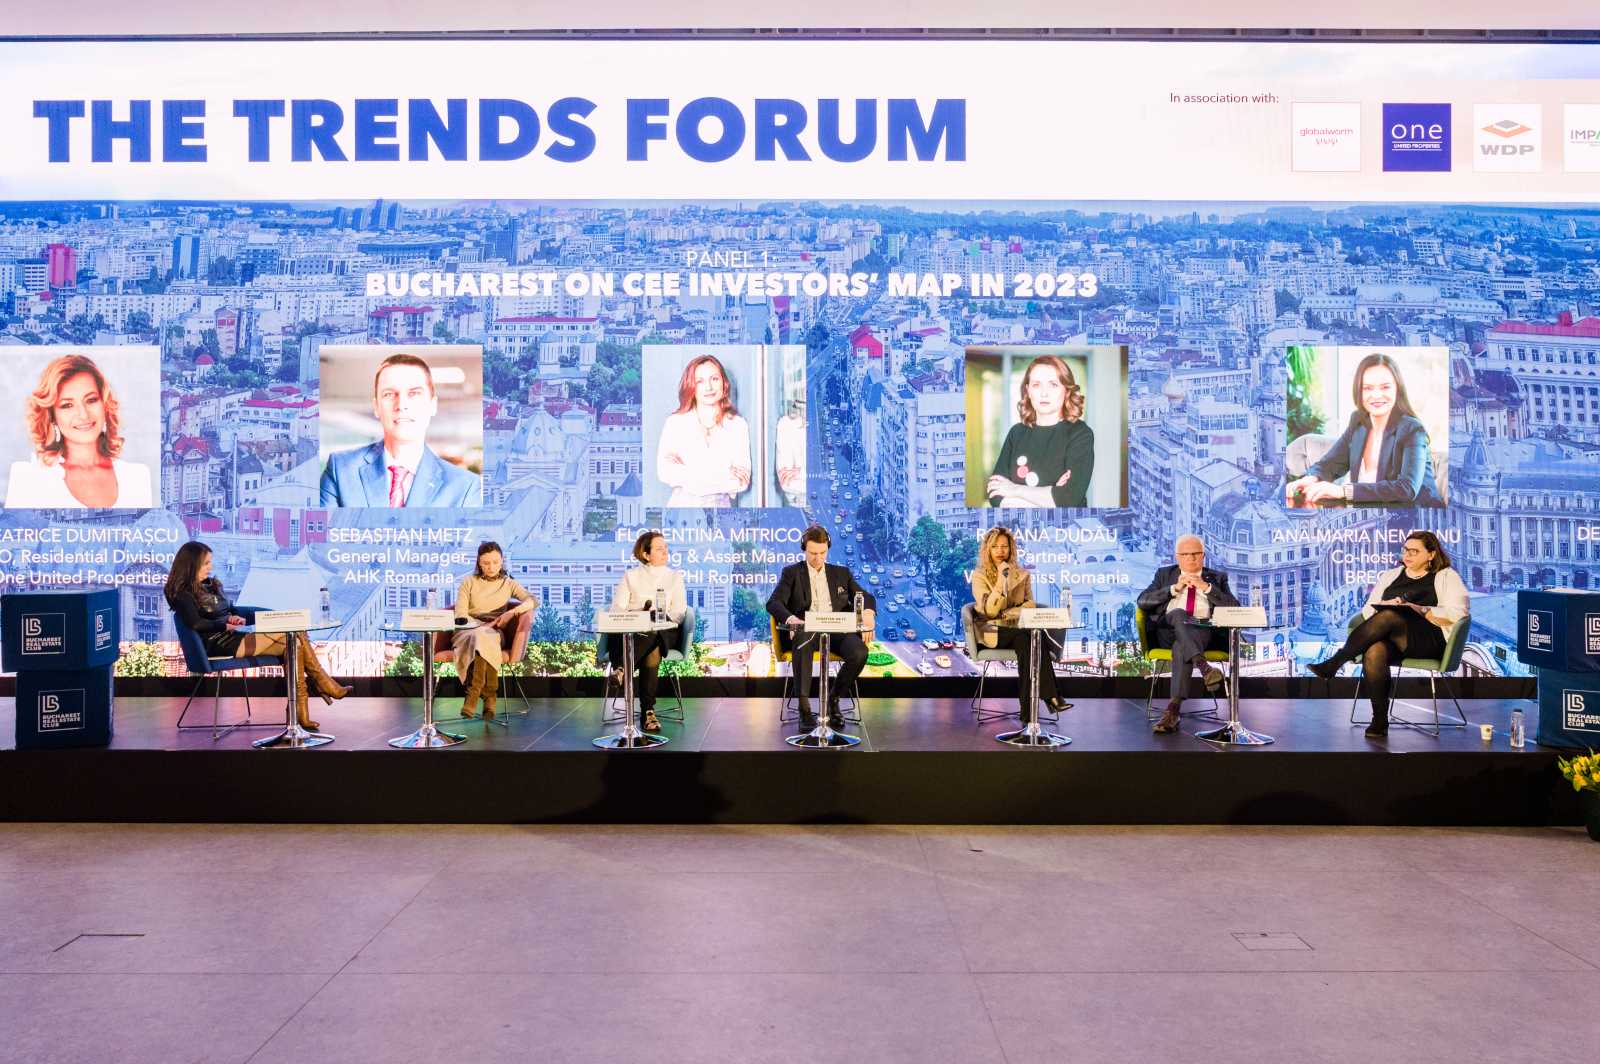 Beatrice Dumitrașcu at The Trends Forum event by BREC - 3